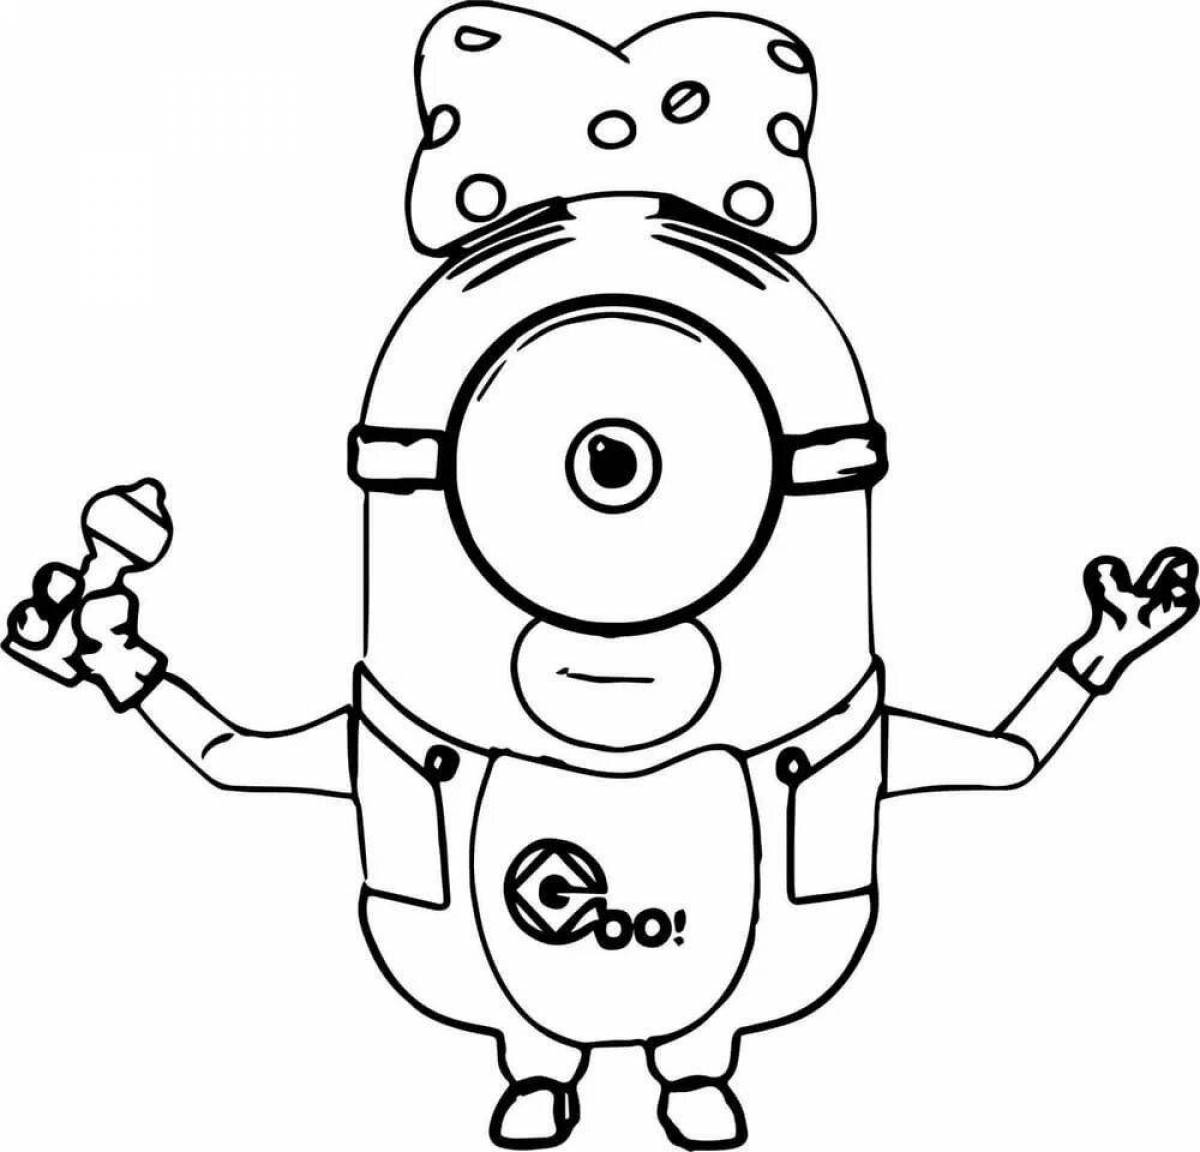 Fancy minion christmas coloring